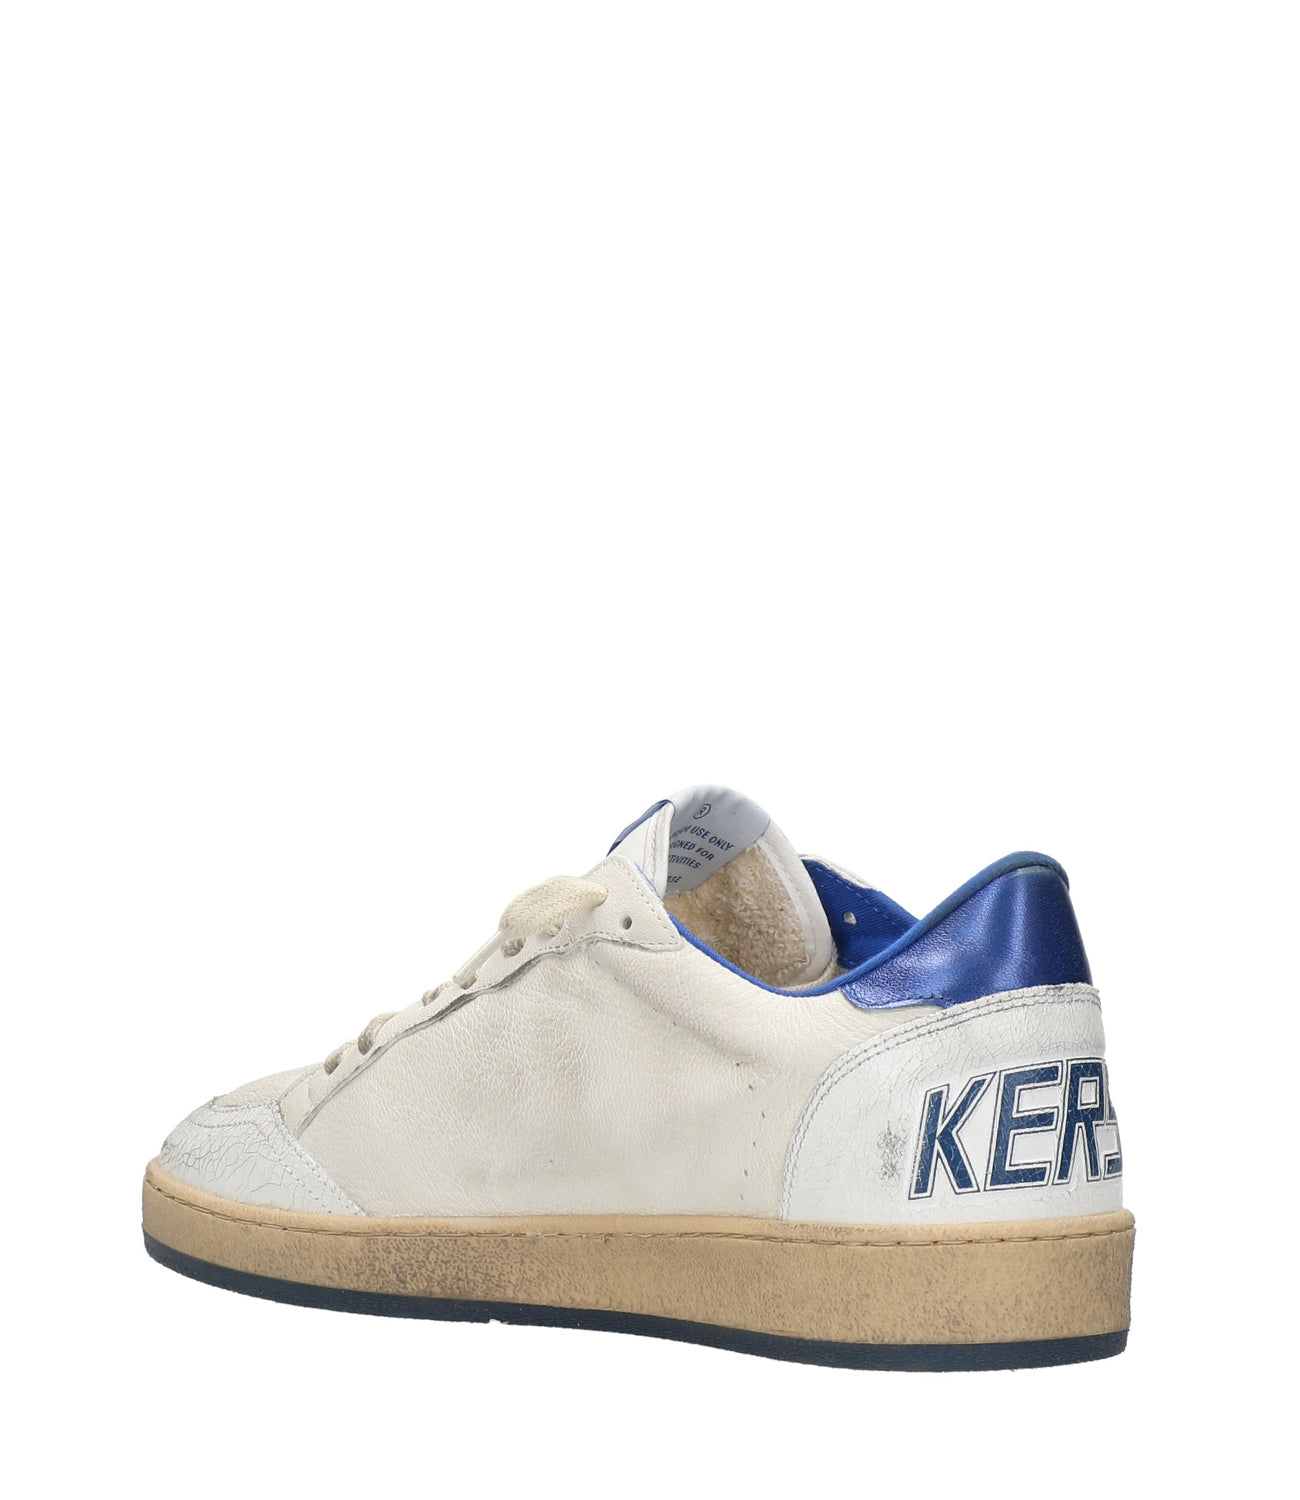 Golden Goose | Ball Star Sneakers White and Blue